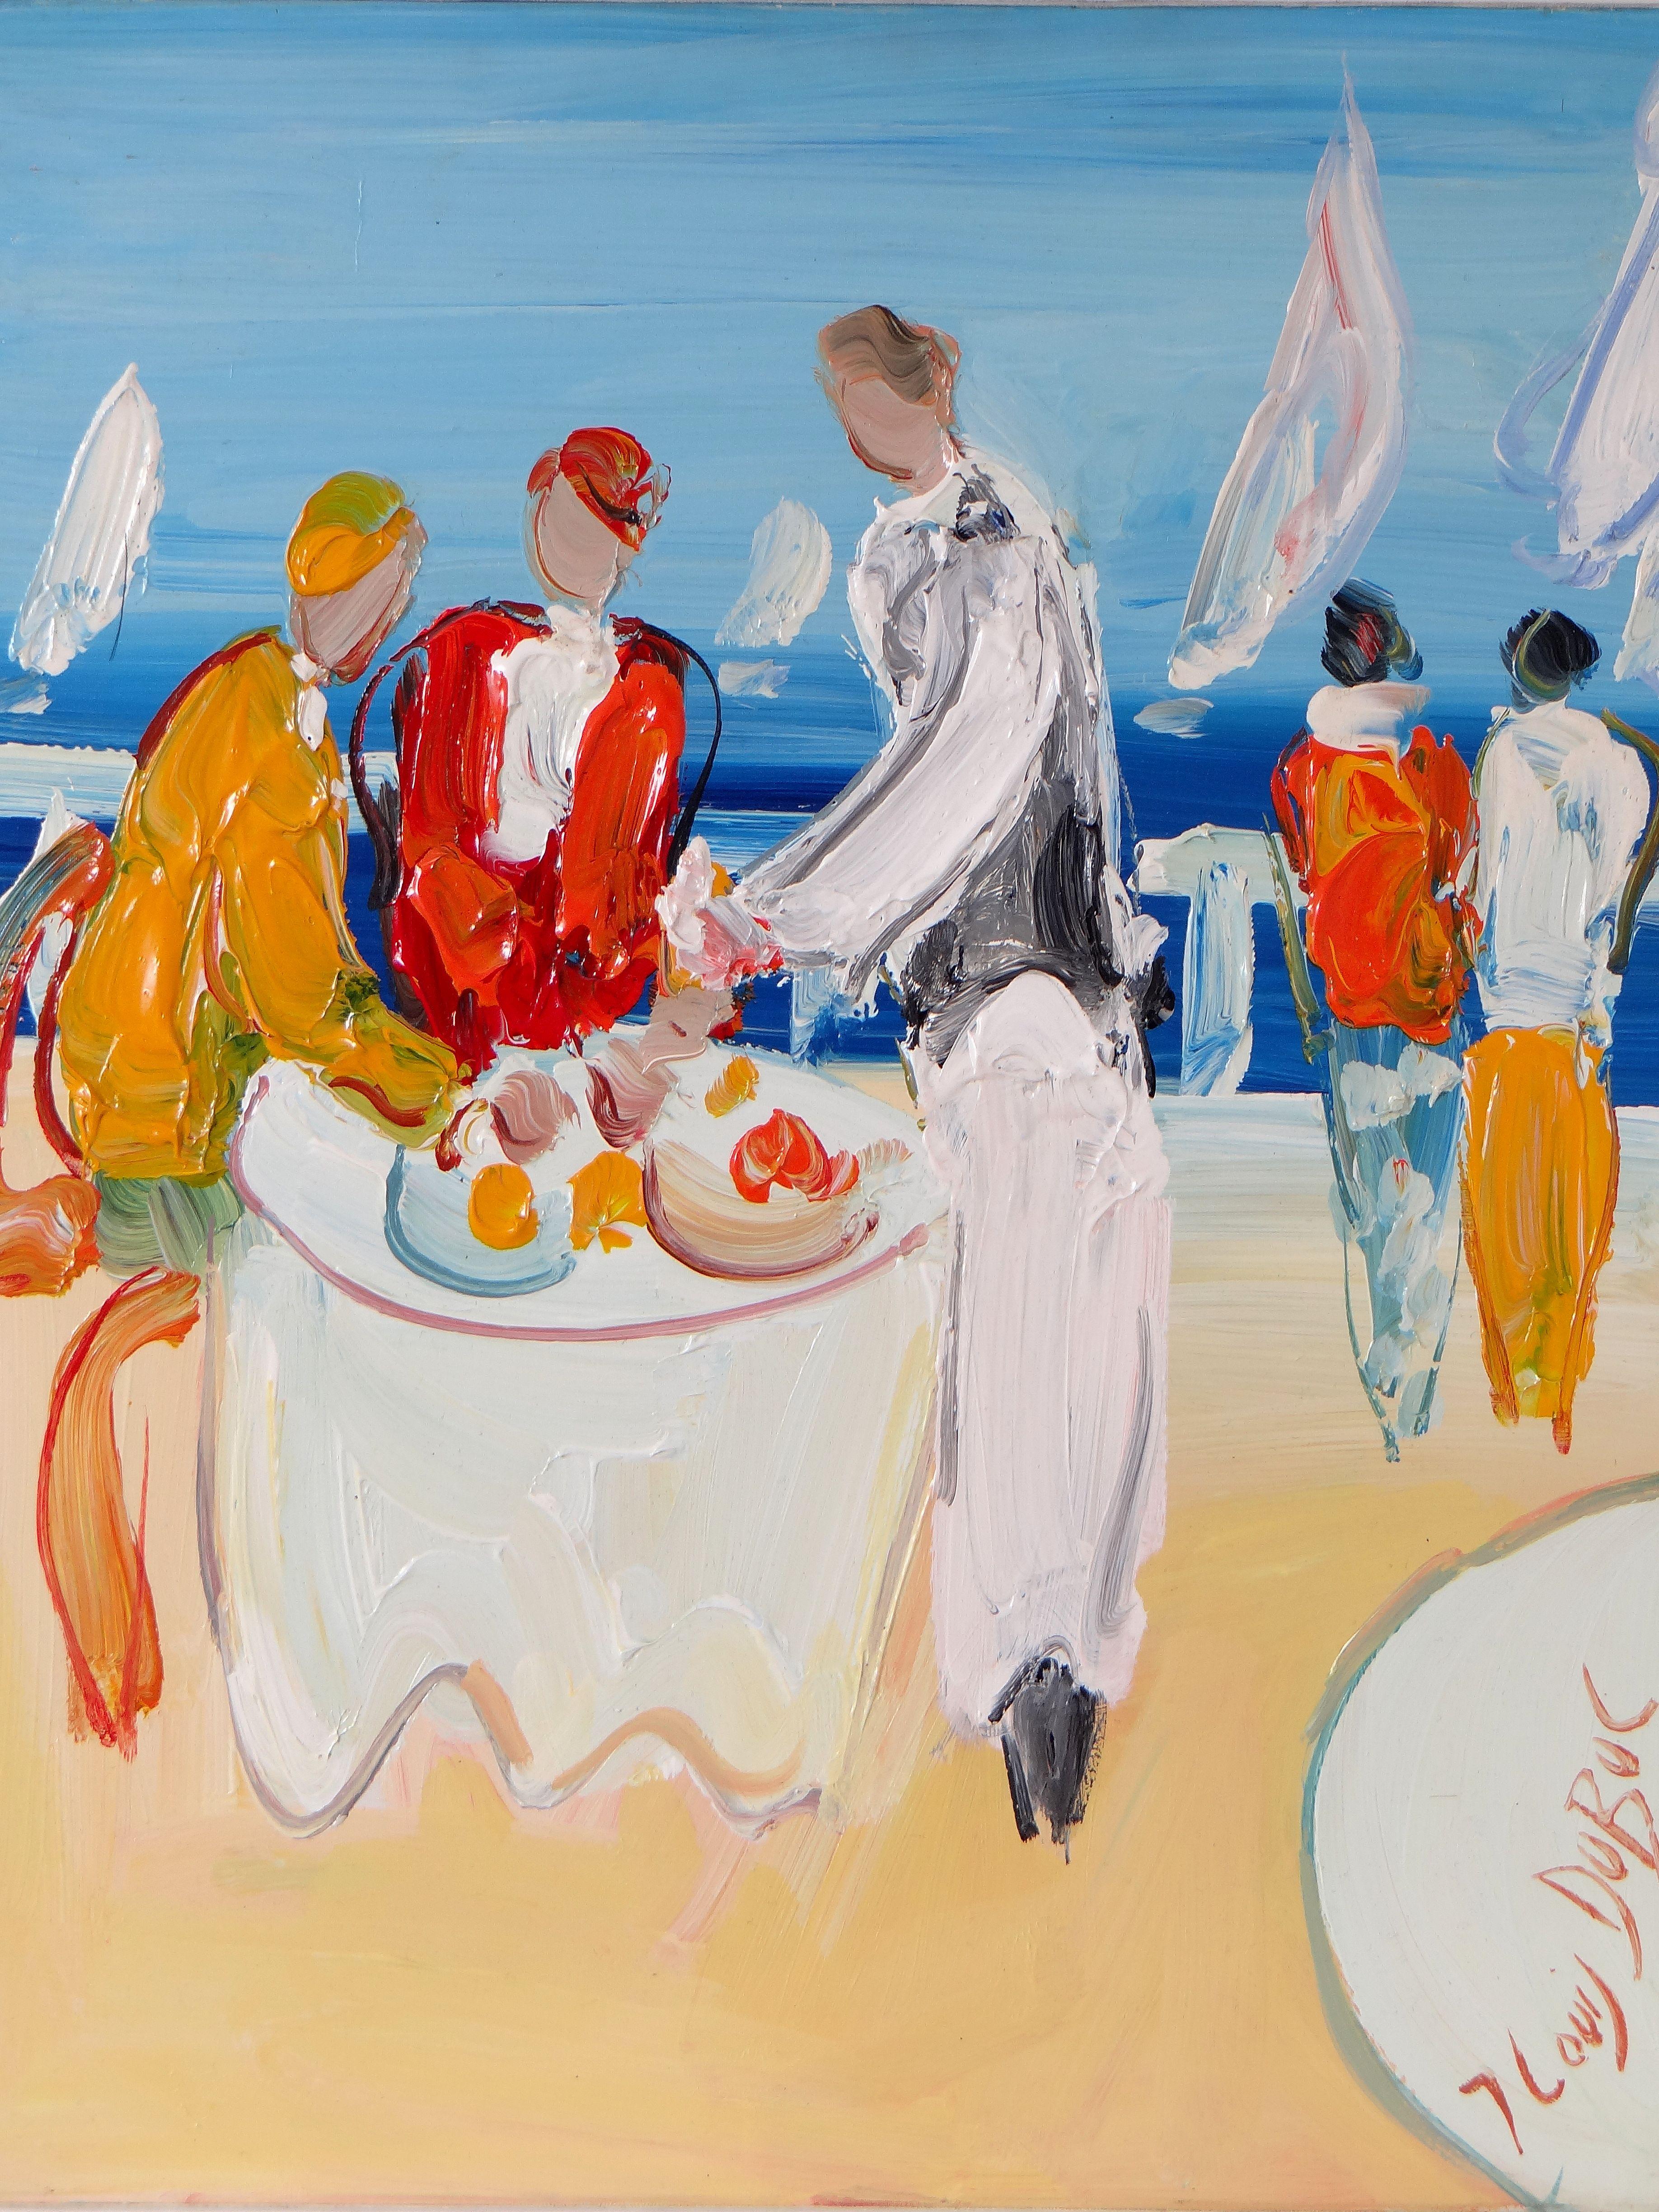 Jean-Louis Dubuc Figurative Painting -  Jean-Louis DUBUC, painting "Lunch in Cannes", 1980s.